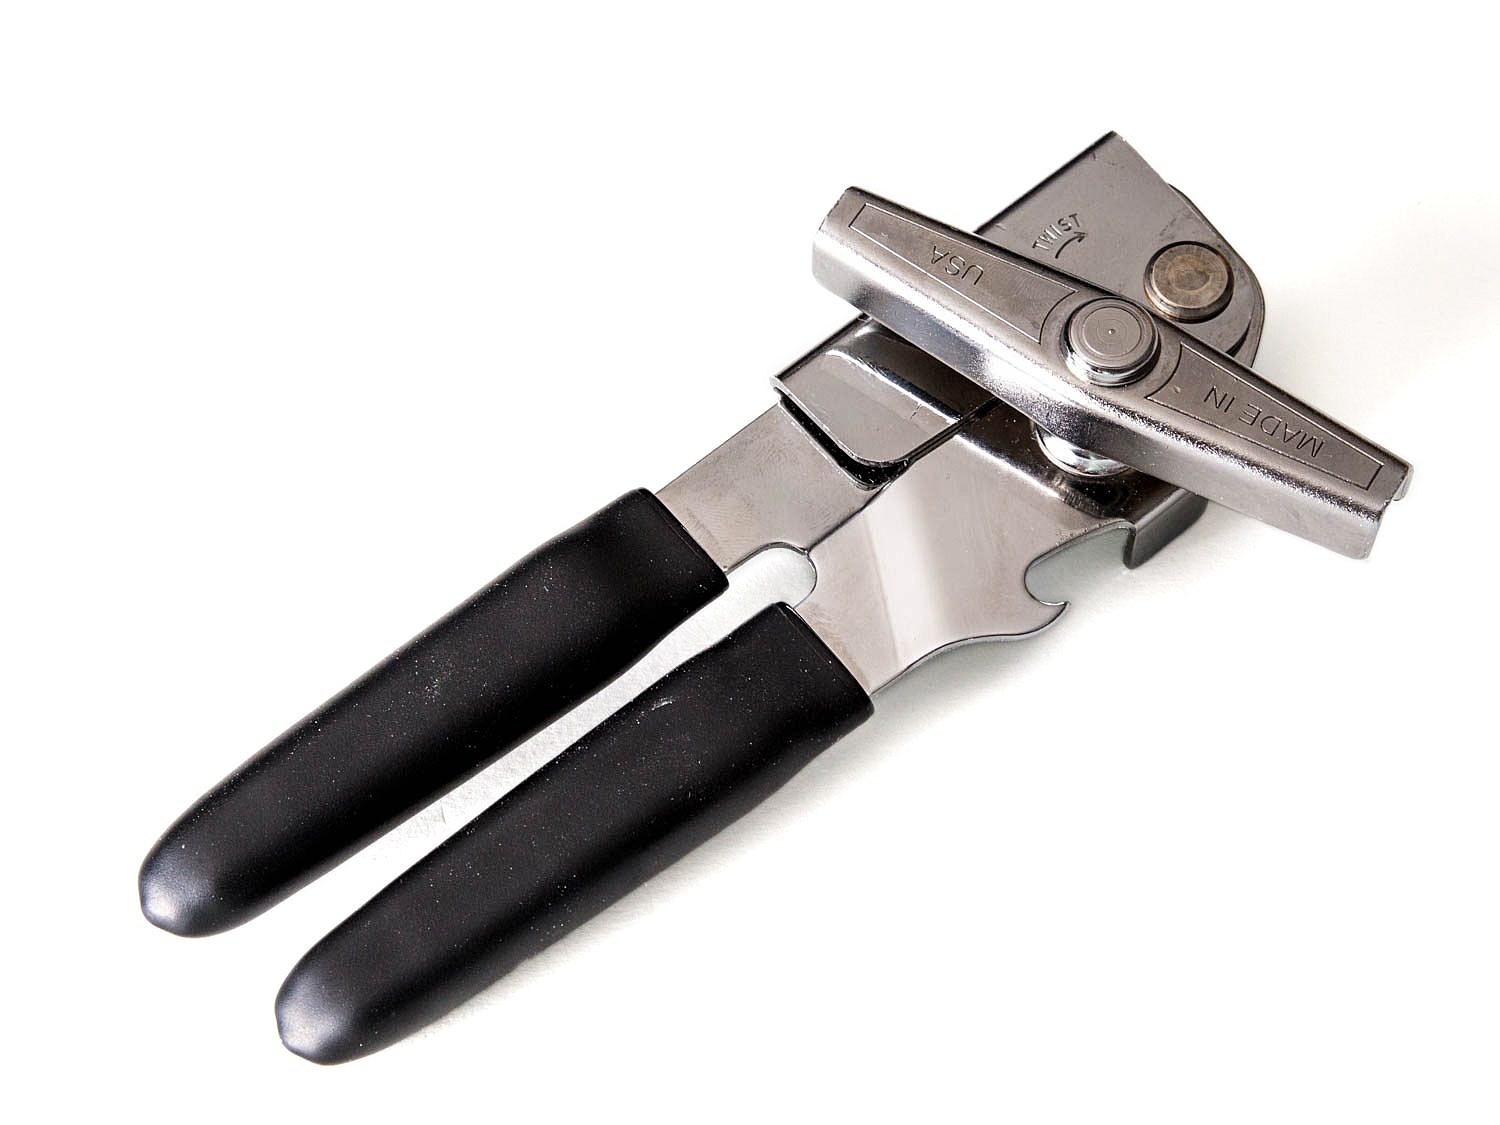 The New, 'Right' Way to Use a Can Opener May Not Be Safe